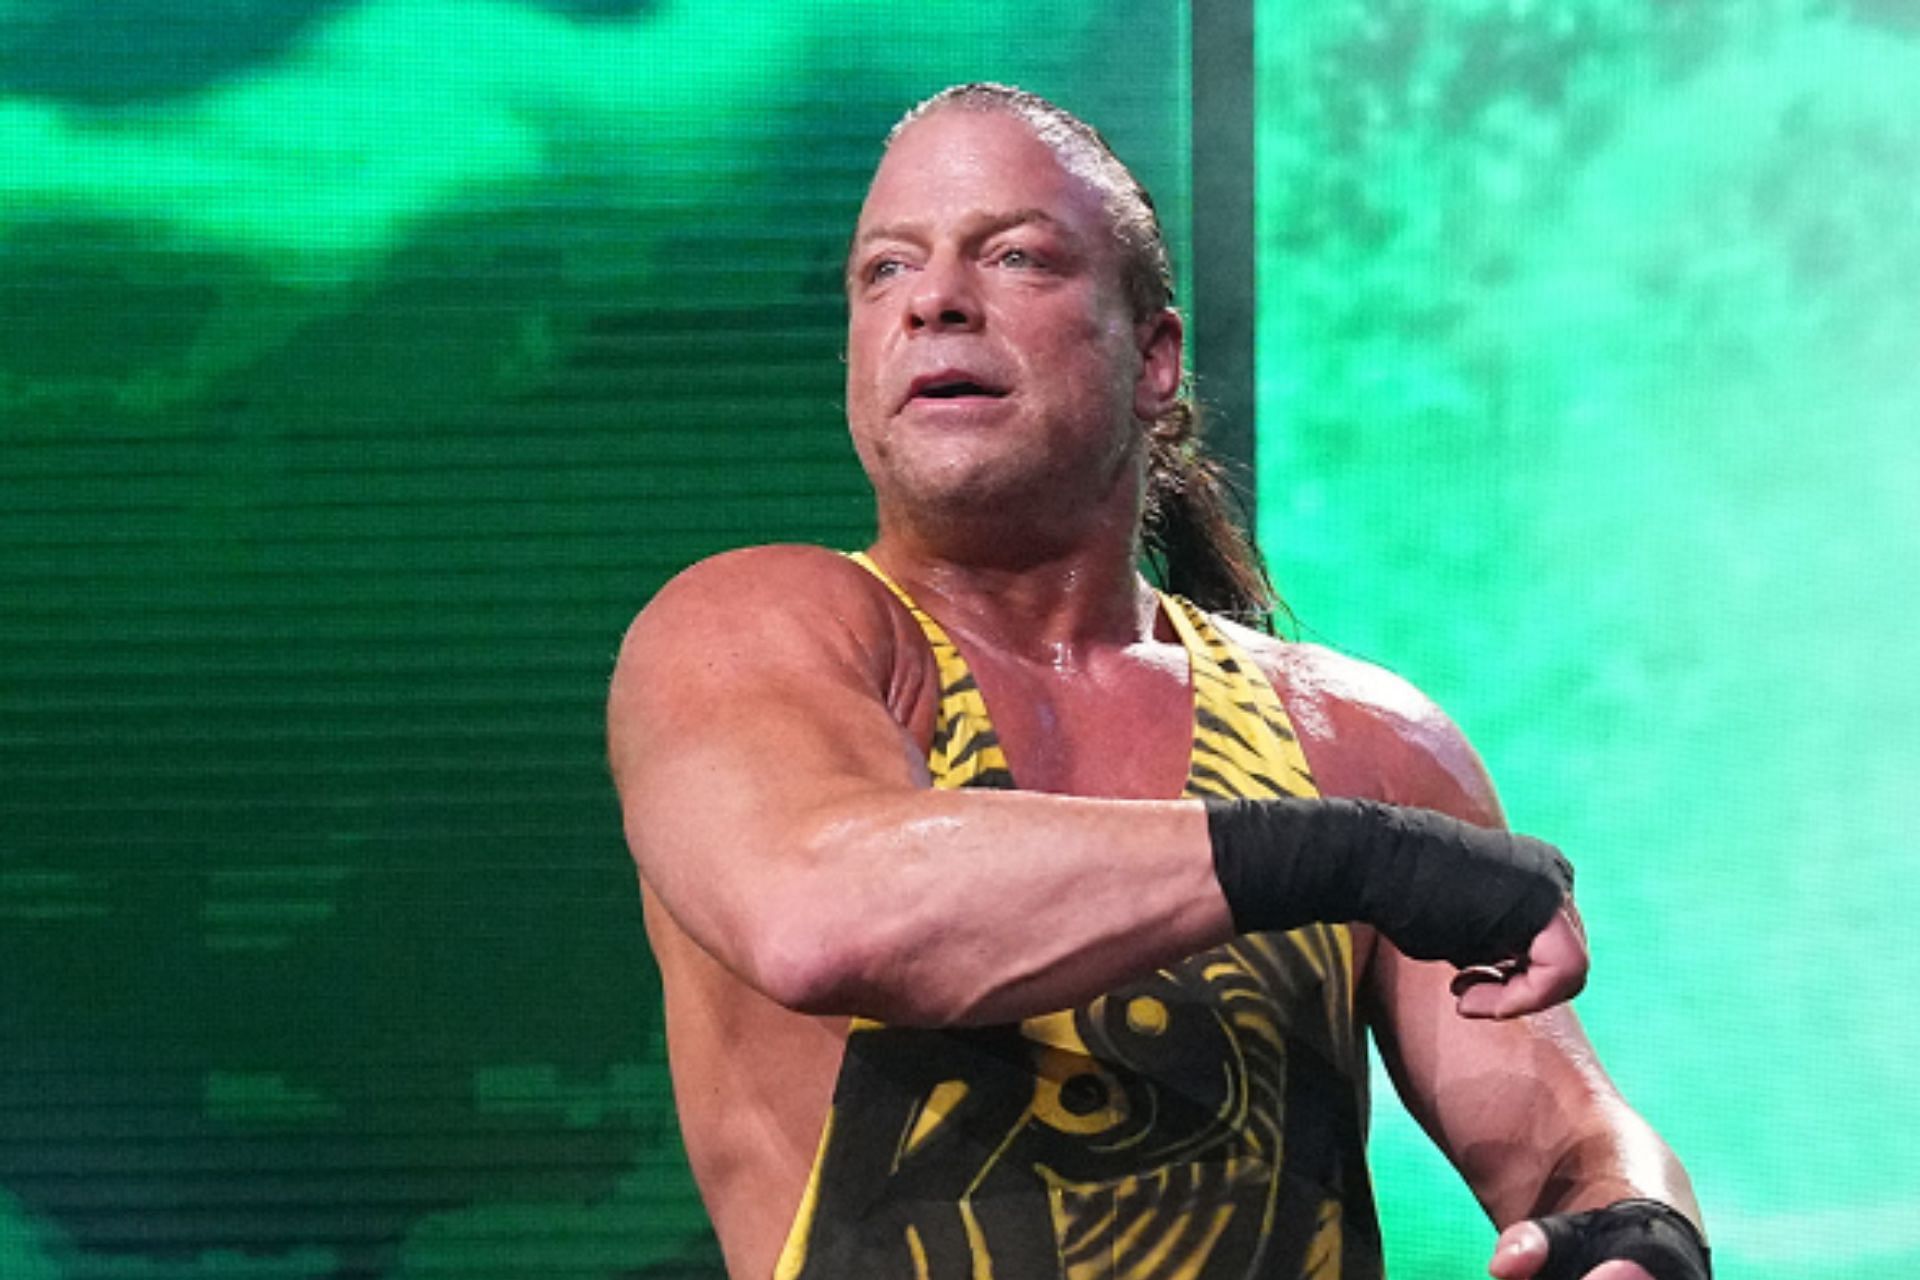 RVD had an interesting anecdote about WWE [Image Credits: AEW Instagram}